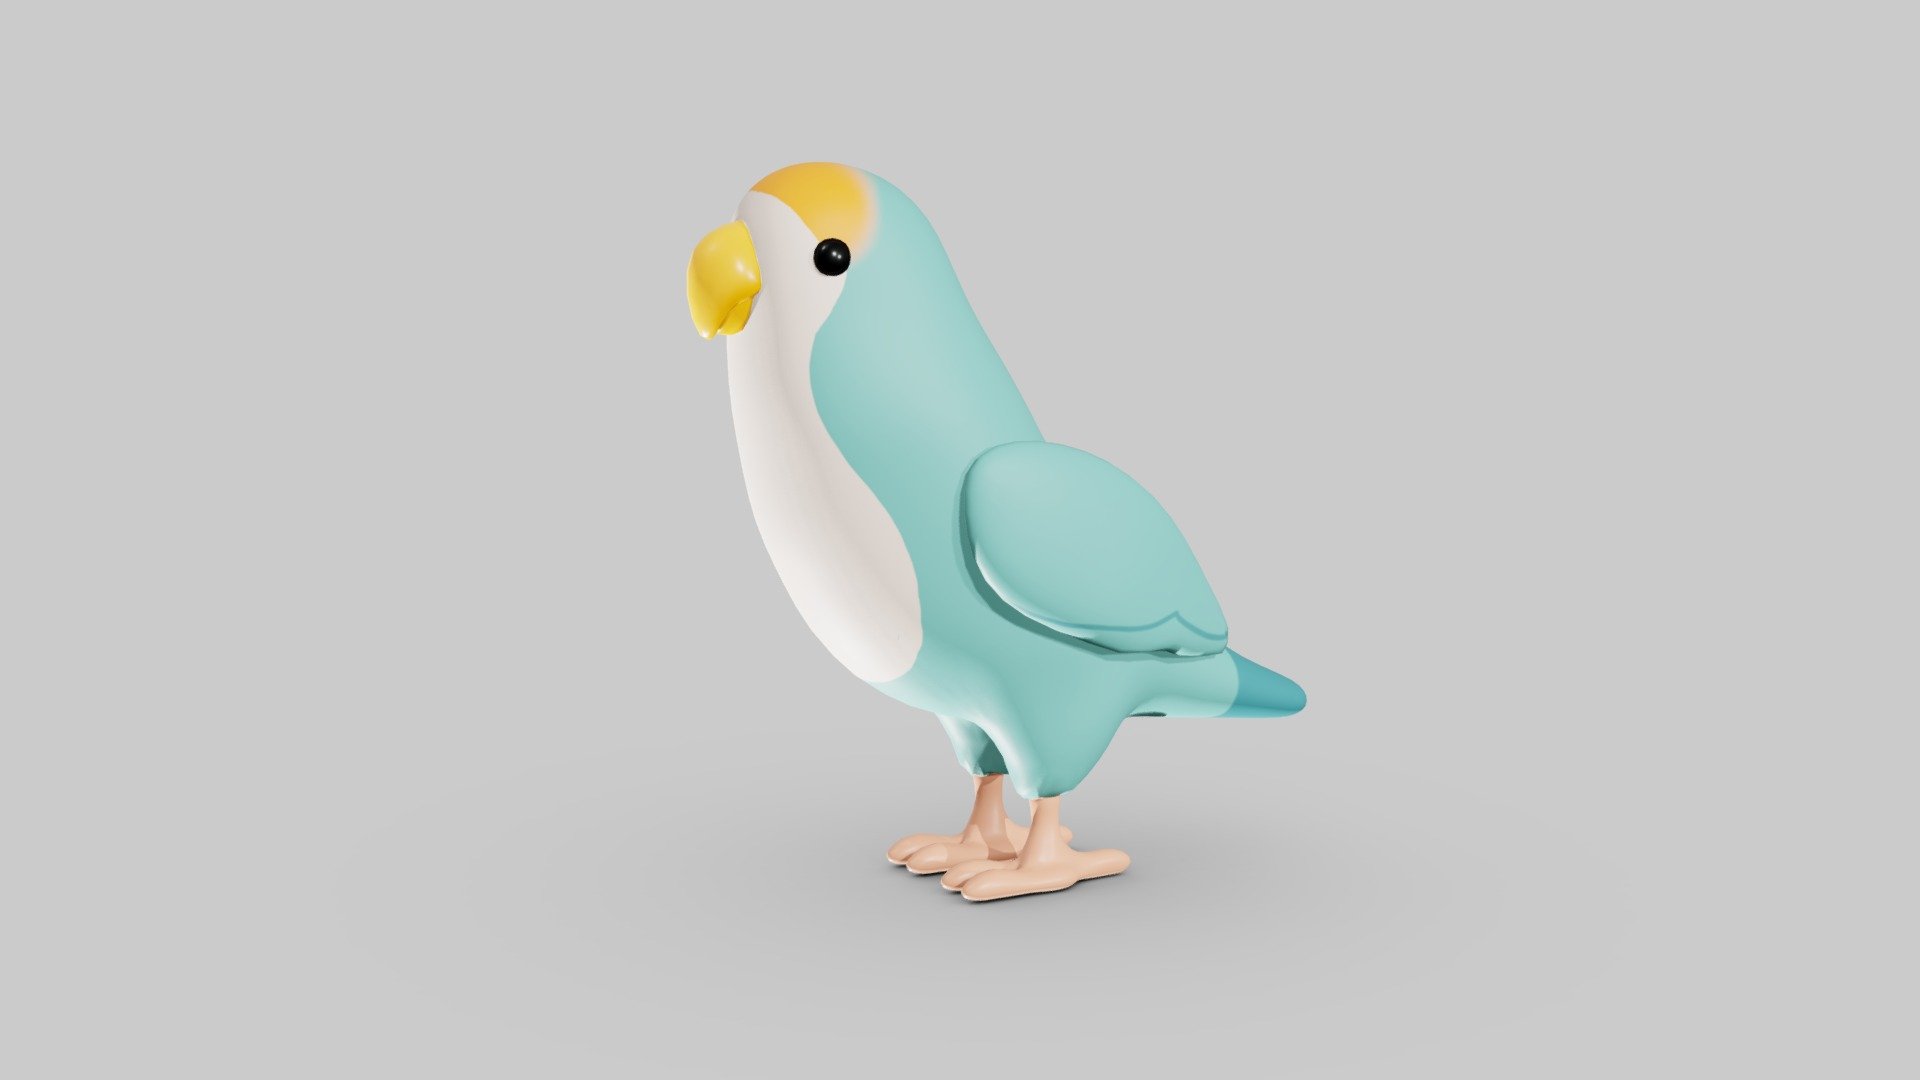 Low Poly Cartoon Lovebird for your renders and games

Textures:

Diffuse color, Roughness, Normal

All textures are 4K

Files Formats:

Blend

Fbx

Obj - Cartoon Lovebird - Buy Royalty Free 3D model by Vanessa Araújo (@vanessa3d) 3d model